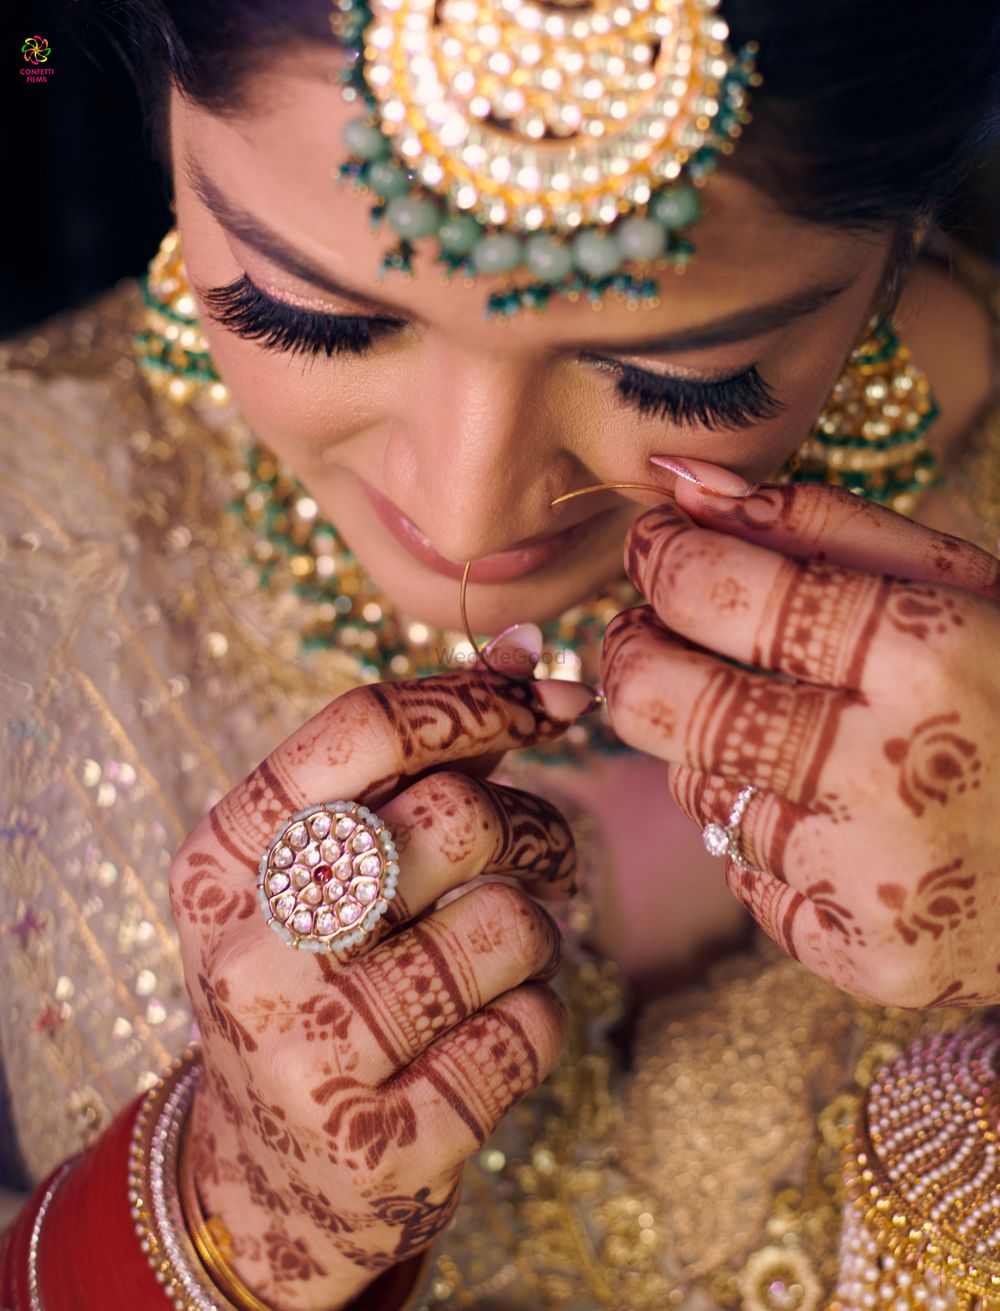 Photo From Jenny weds Umang - By Confetti Films